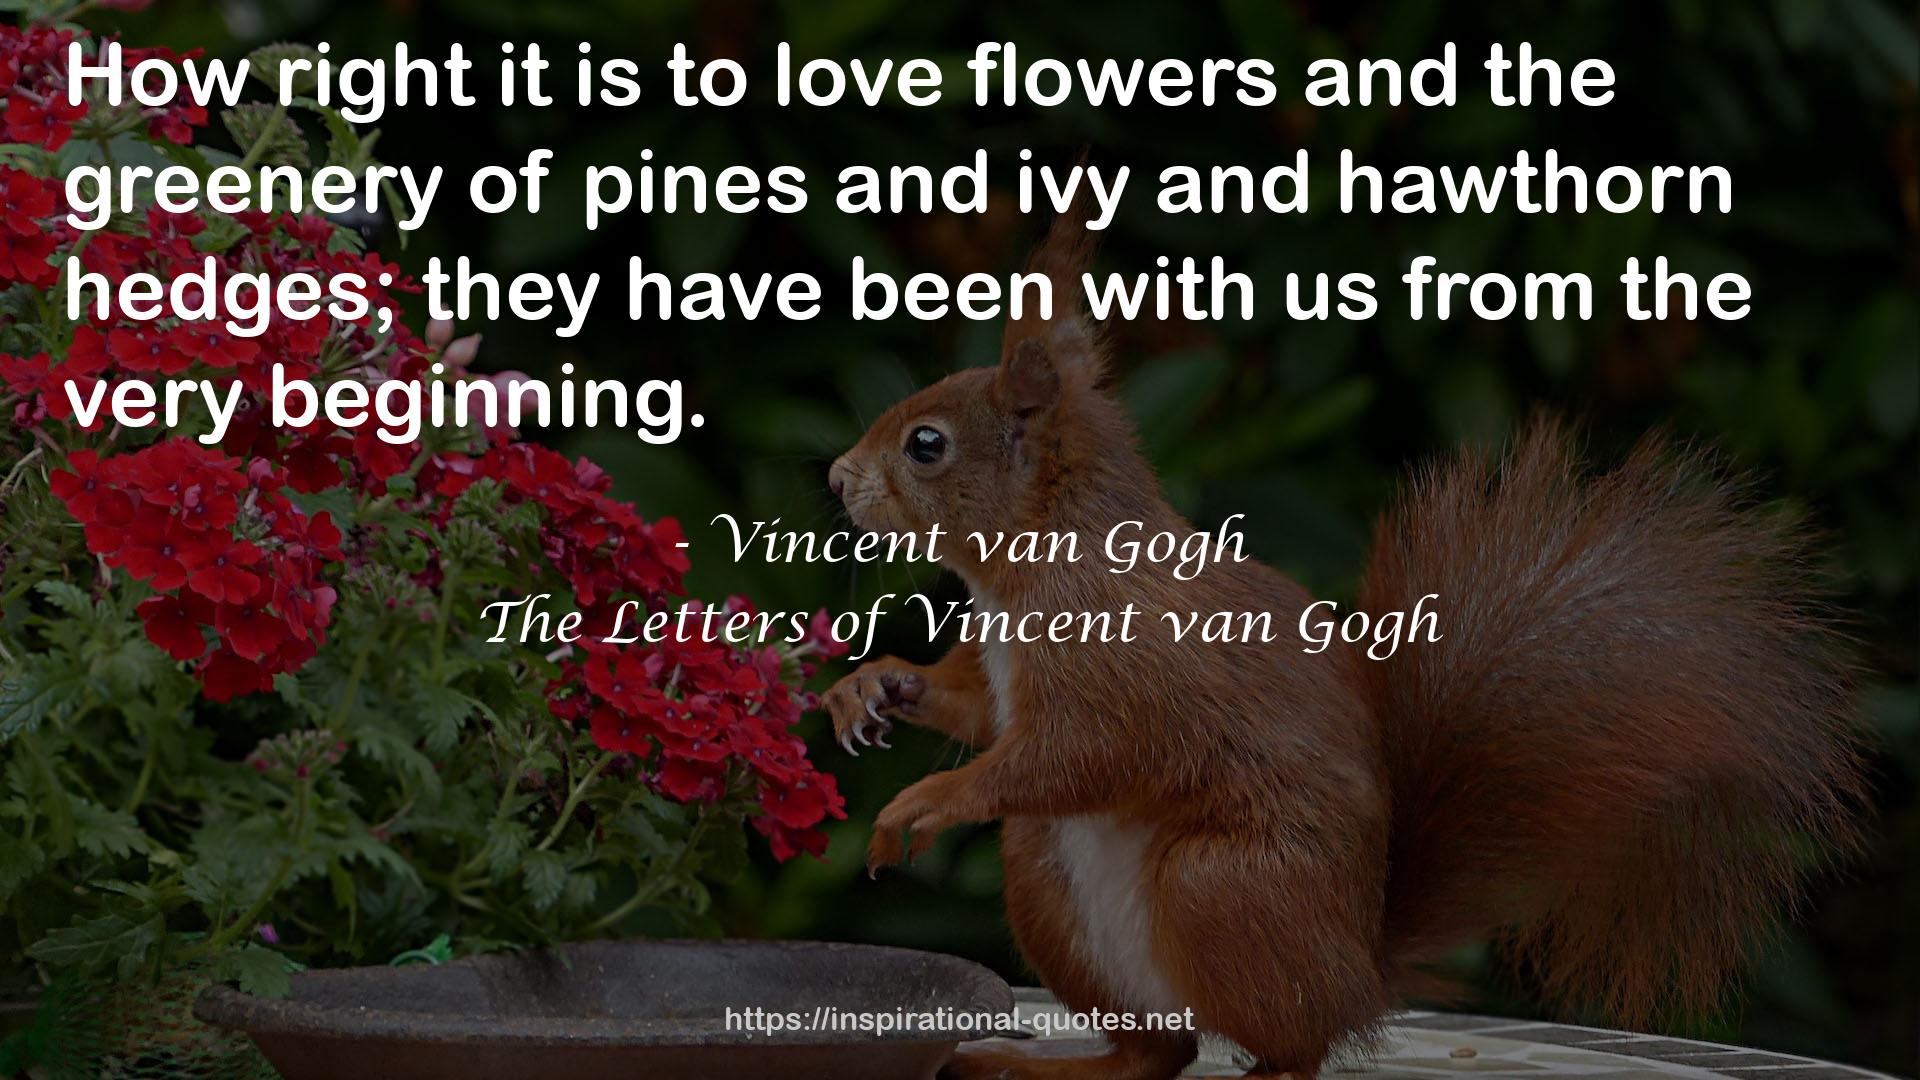 The Letters of Vincent van Gogh QUOTES